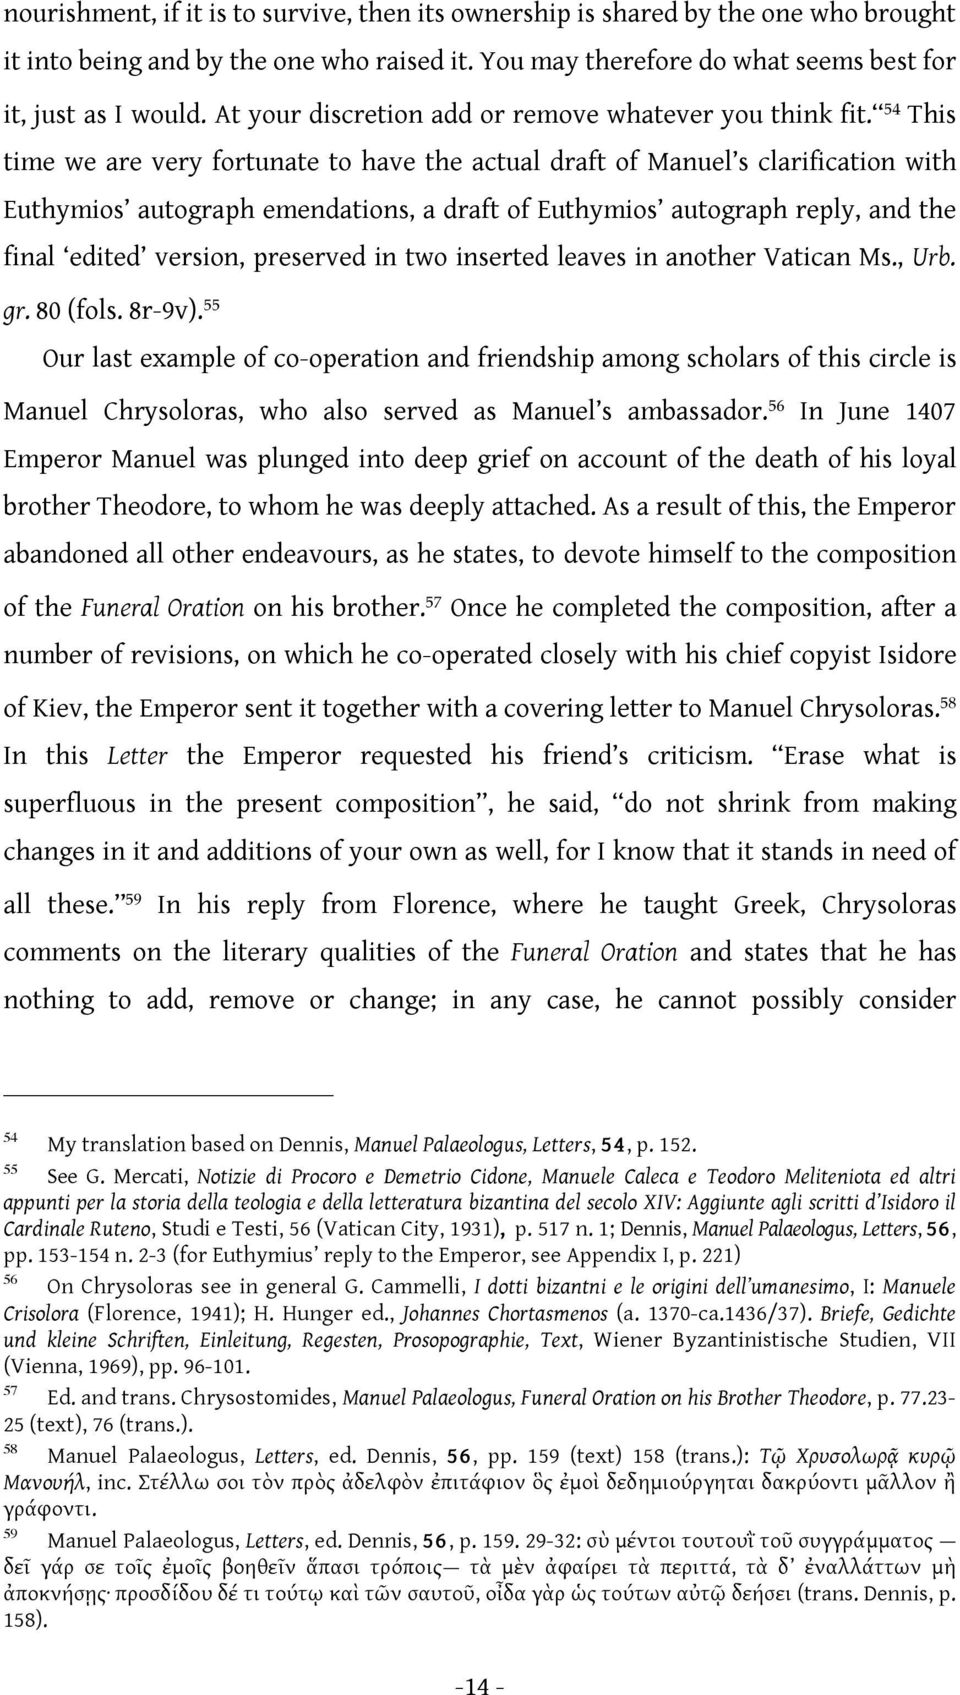 54 This time we are very fortunate to have the actual draft of Manuel s clarification with Euthymios autograph emendations, a draft of Euthymios autograph reply, and the final edited version,